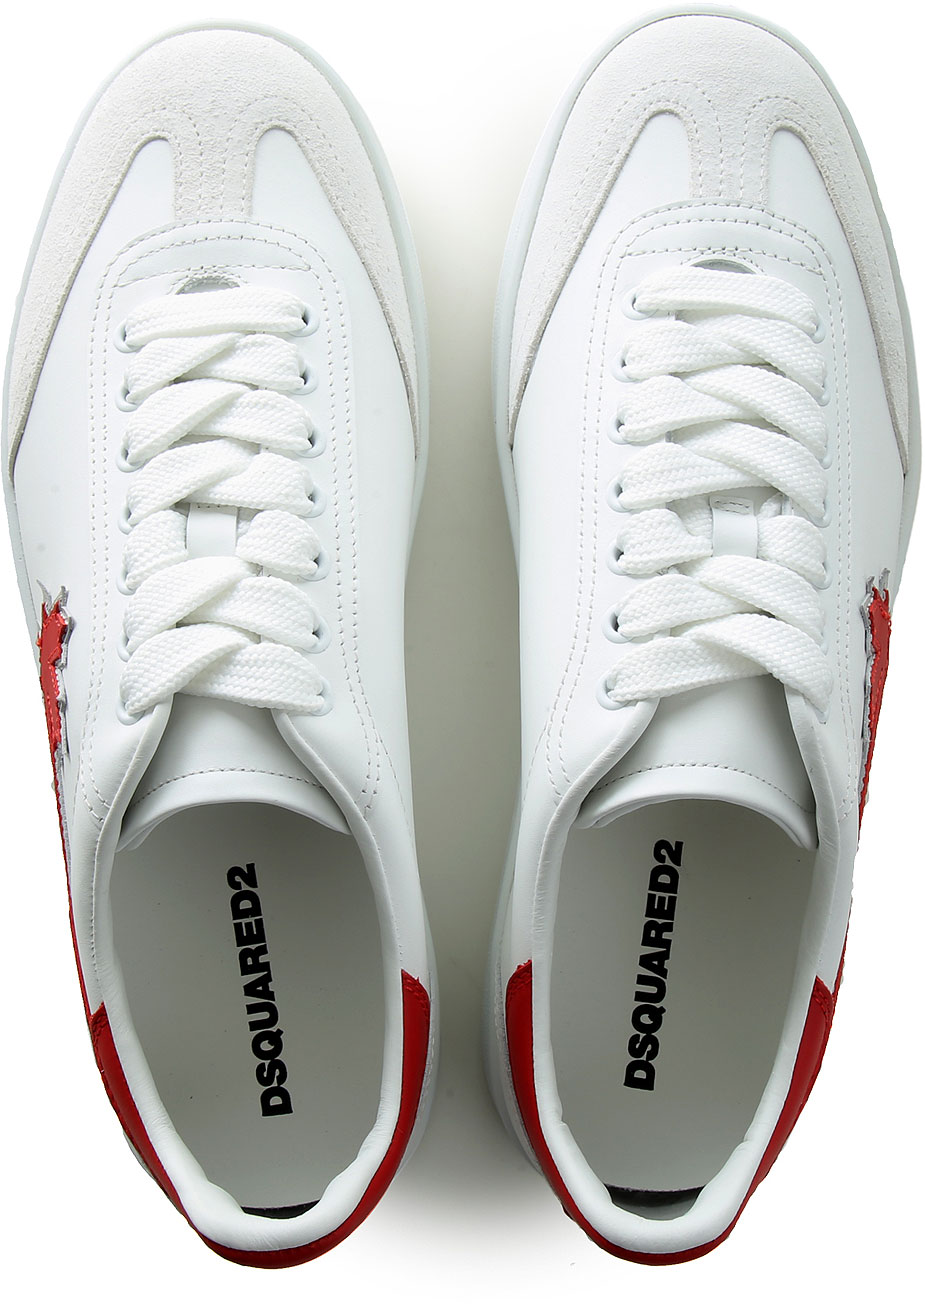 Mens Shoes Dsquared2, Style code: snm0217-13220001-m1747